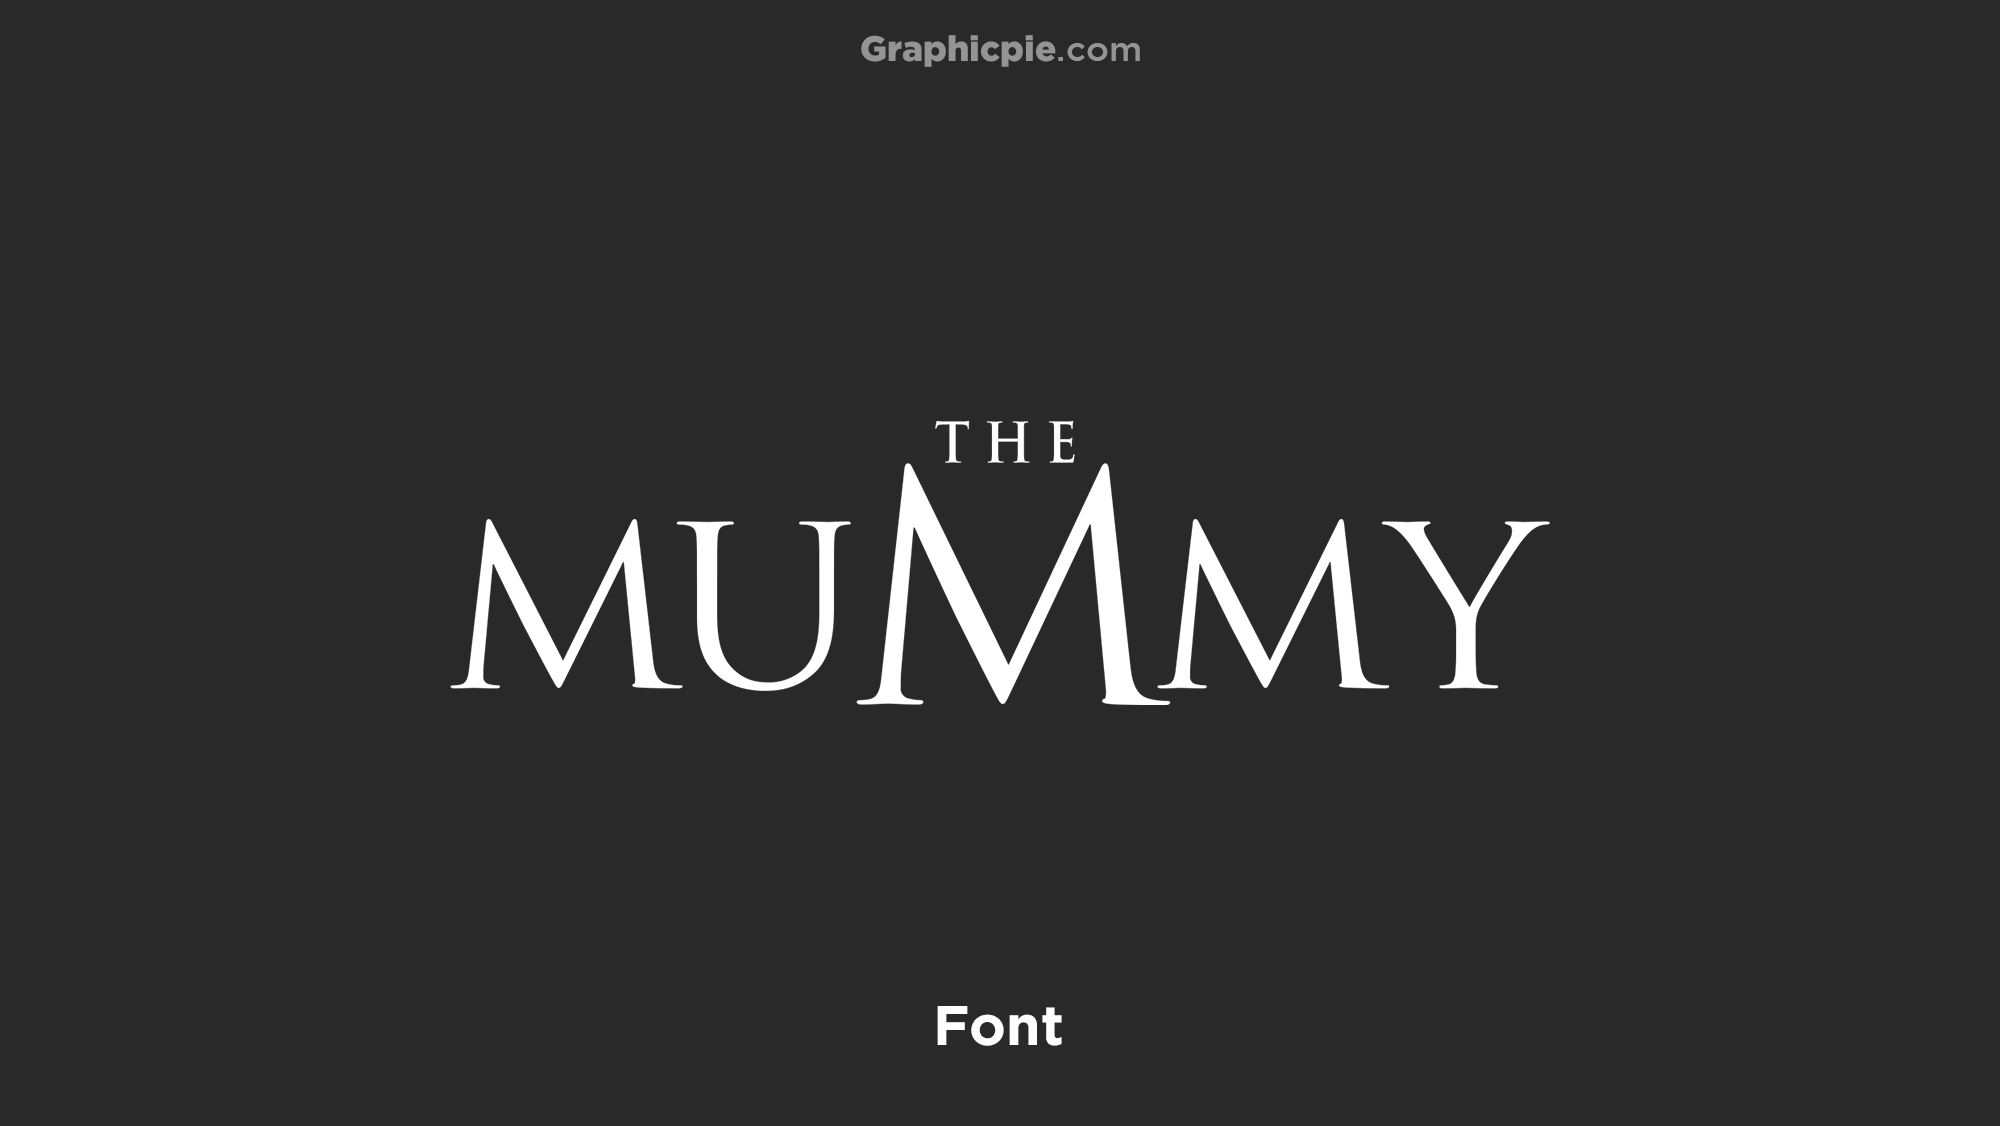 what-font-does-the-mummy-movie-use-graphic-pie